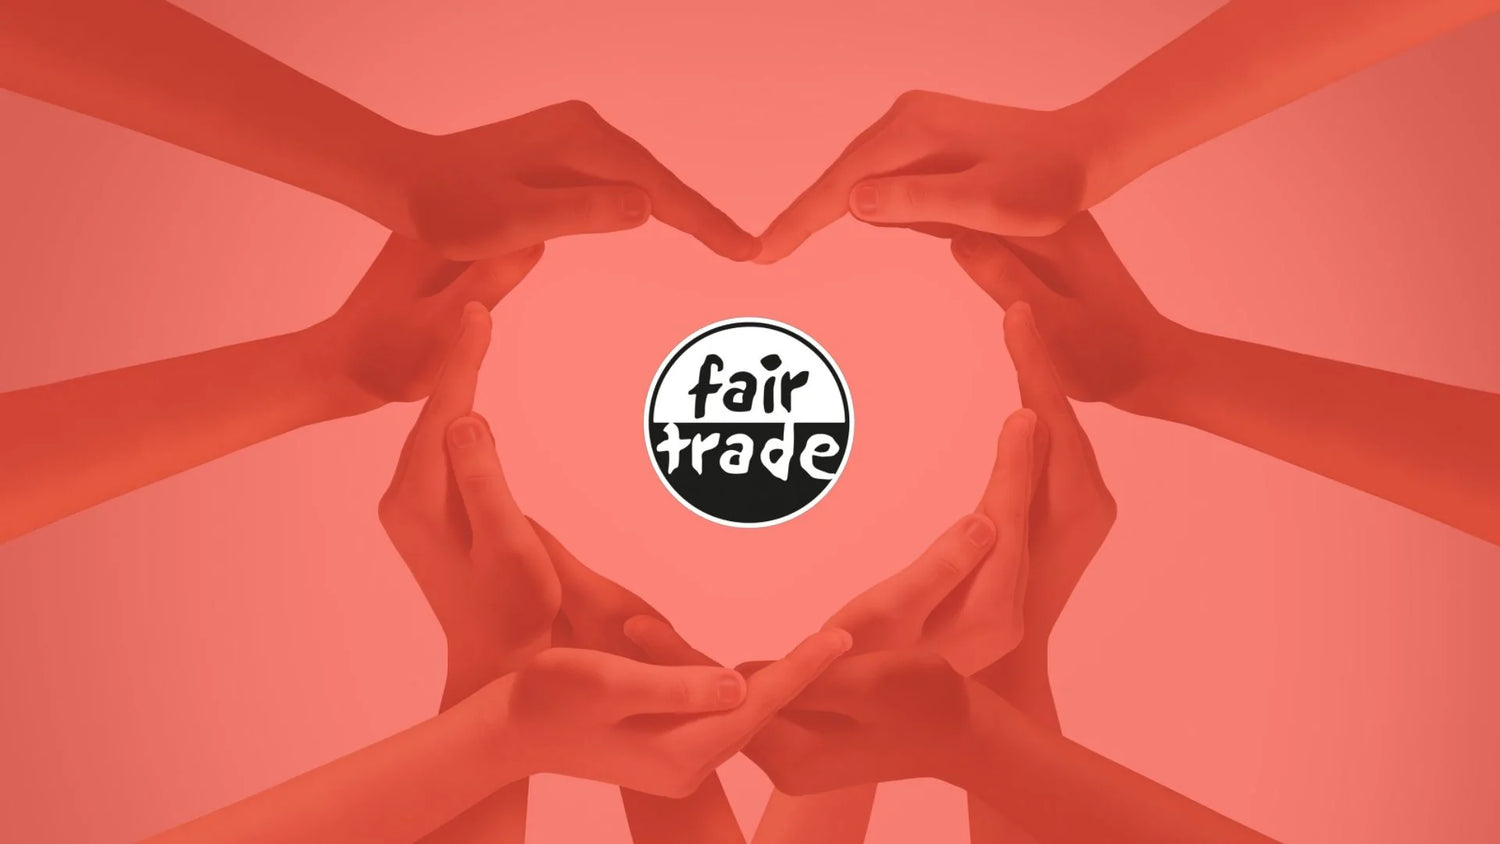 Image Of The Fair Trade Danmark Logo Surrounded By Hands Making The Shape Of A Heart